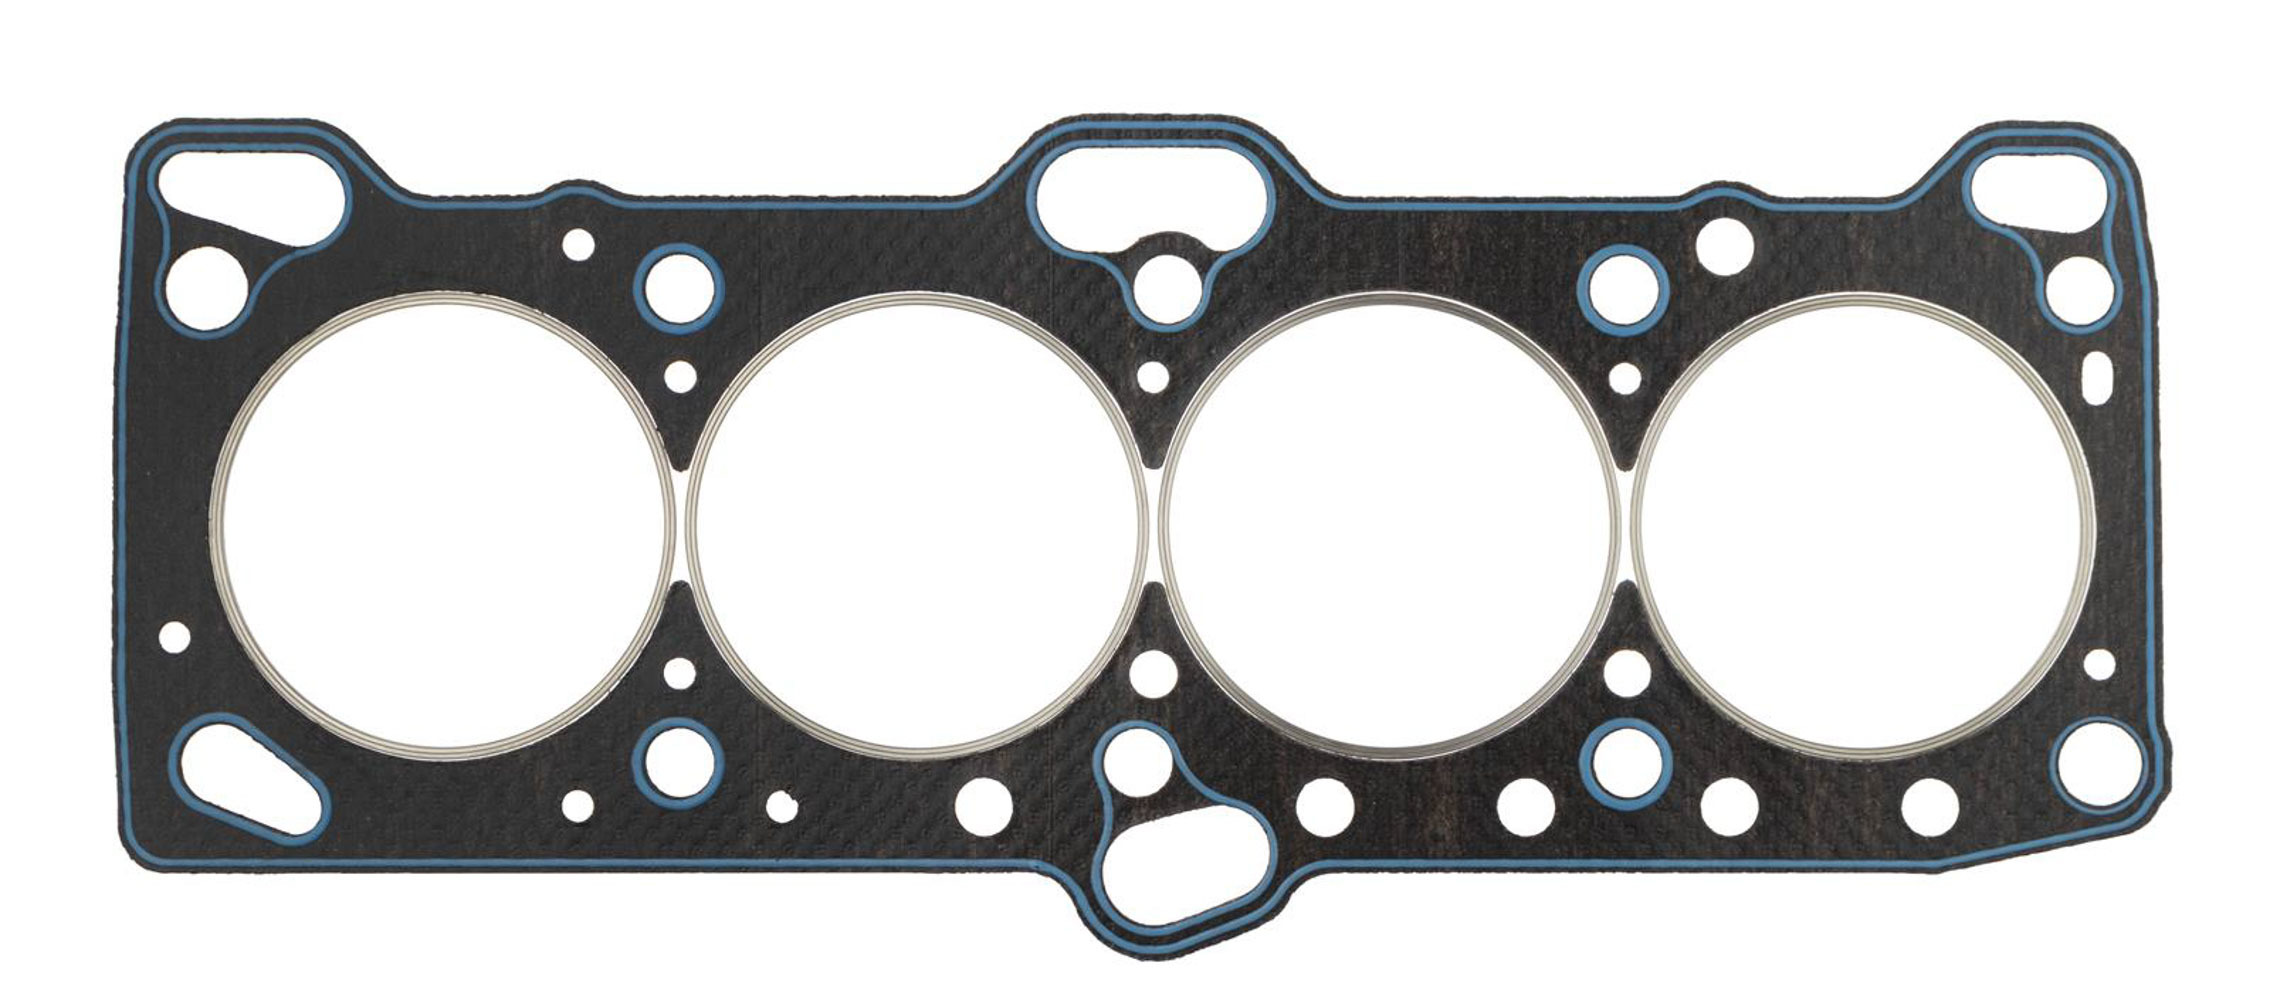 SCE Gaskets CR330058 - Cylinder Head Gasket, Vulcan Cut Ring, 86.50 mm Bore, 1.30 mm Compression Thickness, Steel Core Laminate, Mitsubishi 4-Cylinder, Each